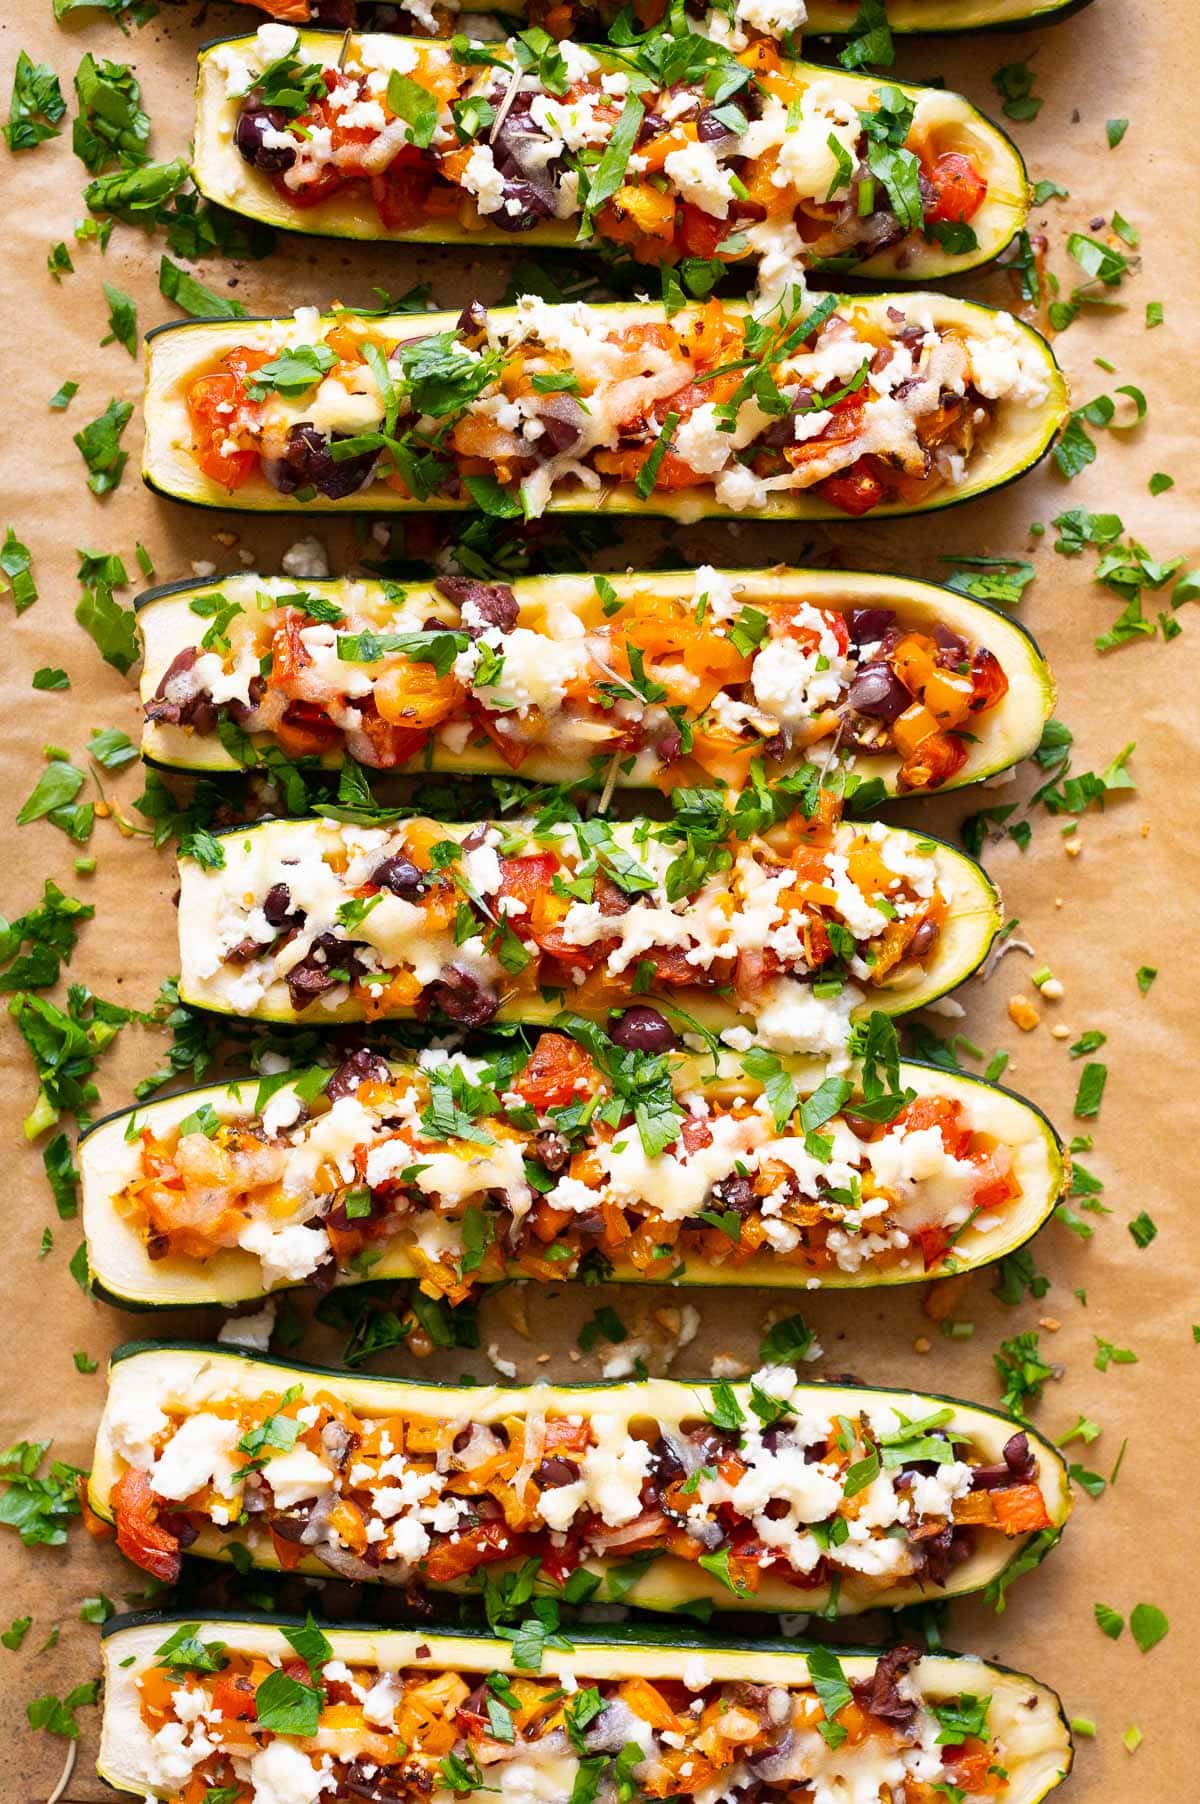 Mediterranean zucchini boats garnished with parsley on a baking sheet.